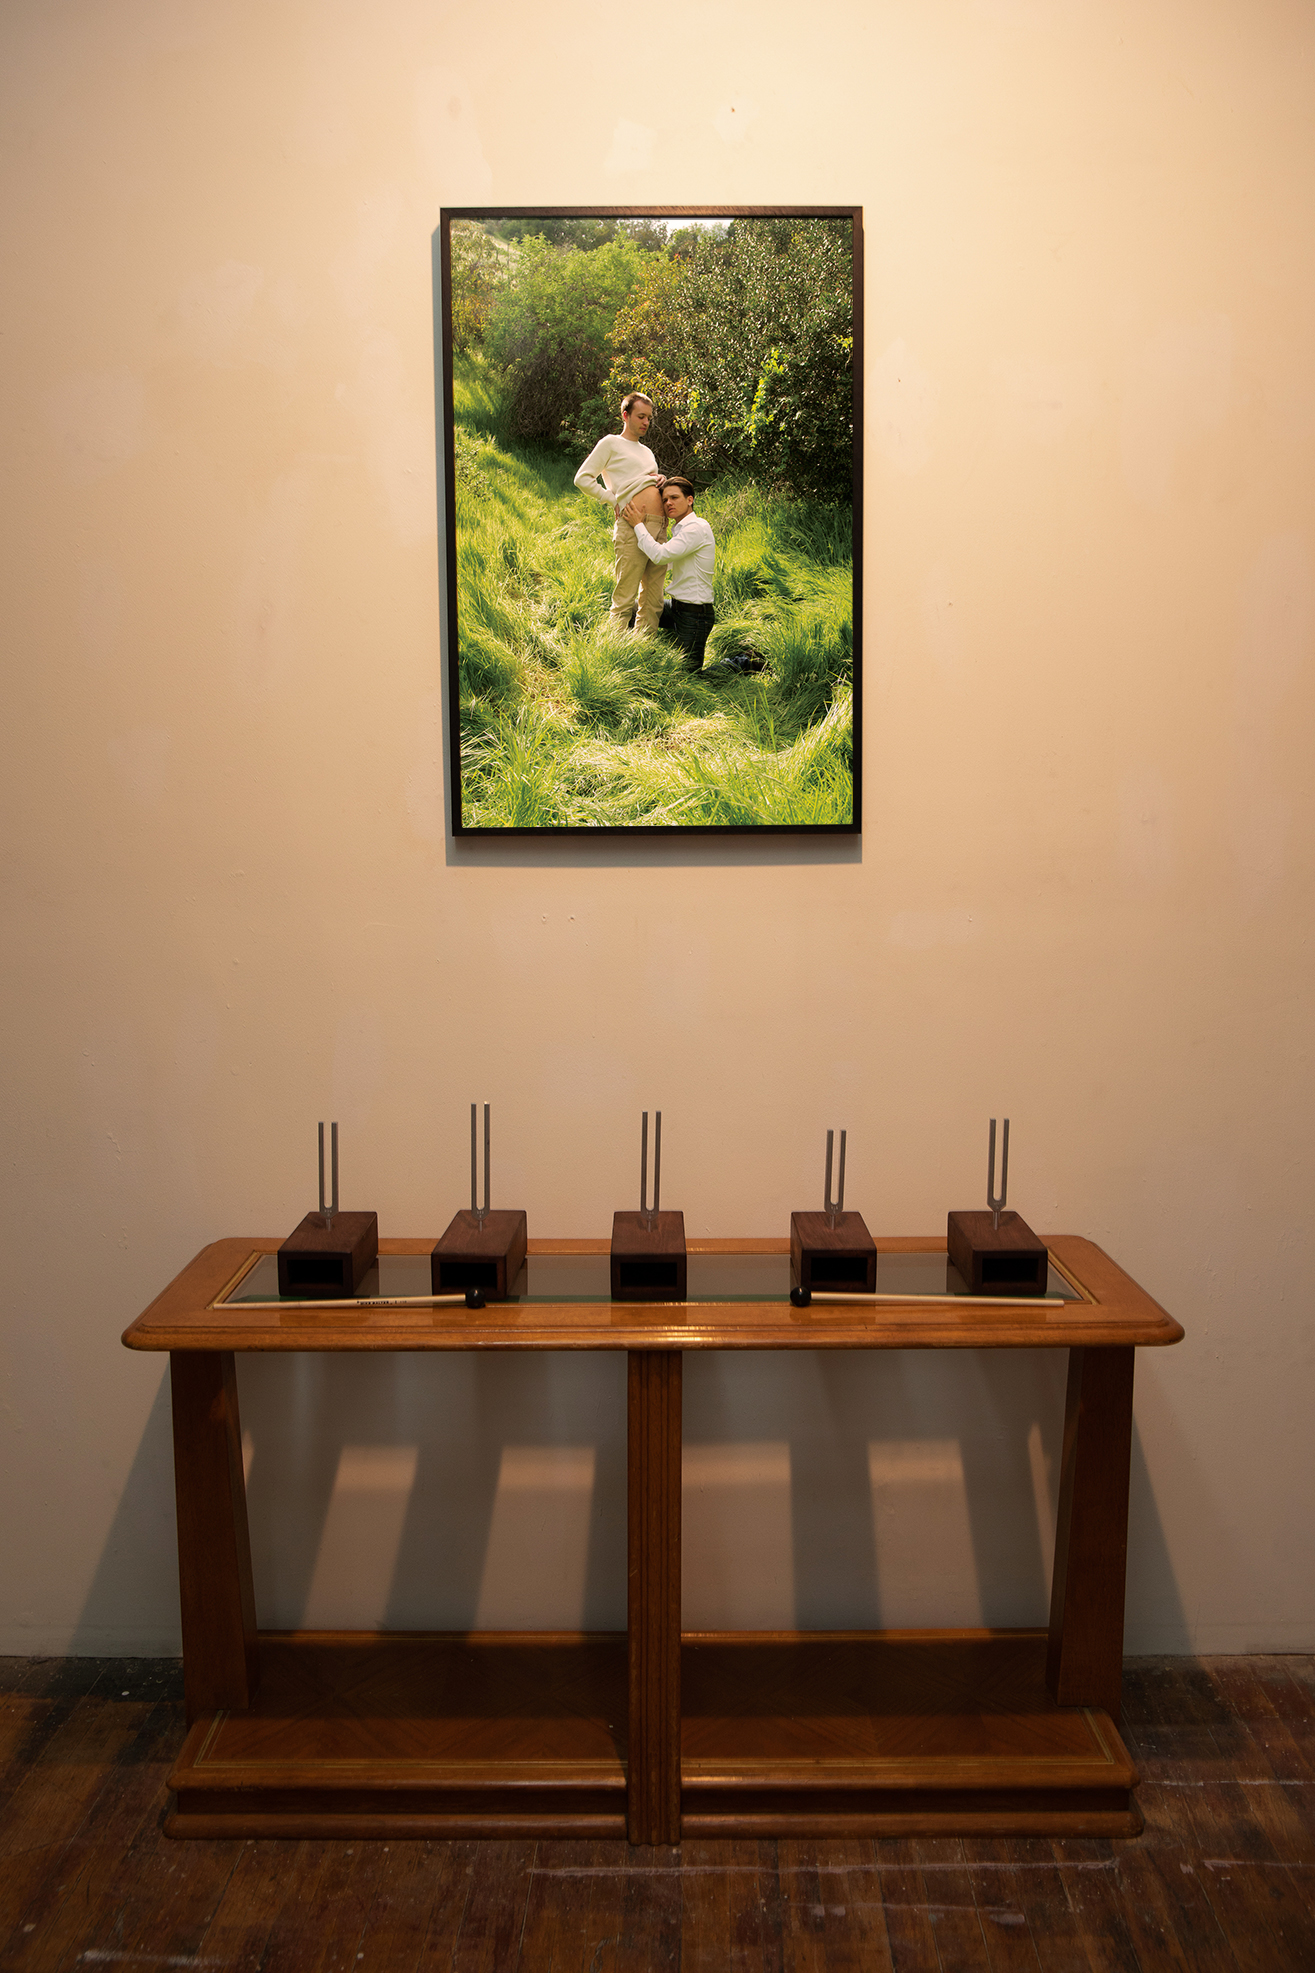 Detail of a small wooden table with five tuning forks in resenator boxes set up on them and a print above them against a white wall